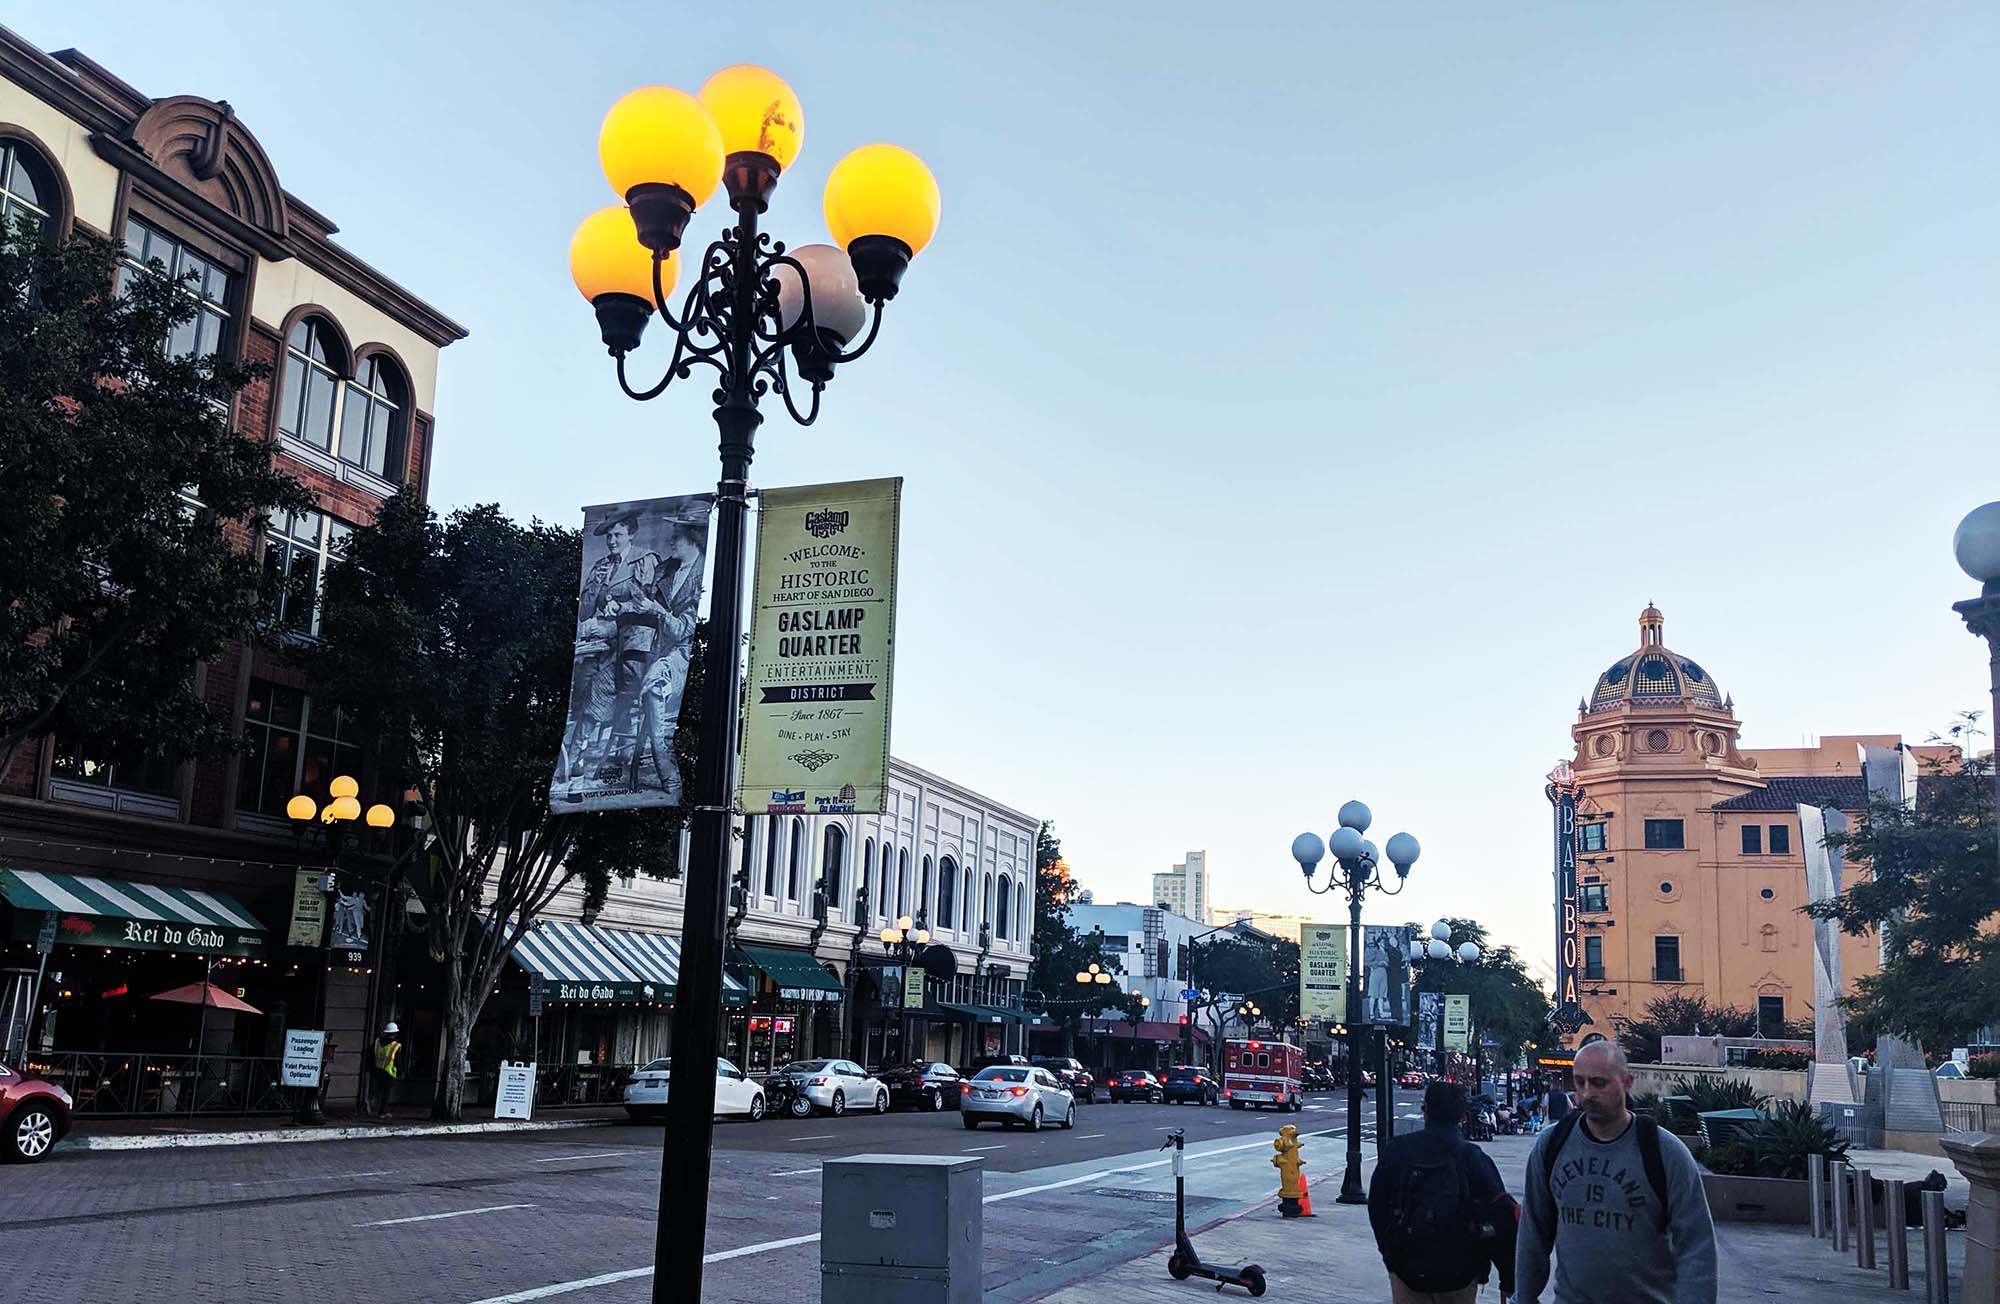 The Gaslamp Quarter Creates An Identity To Attract Residents And